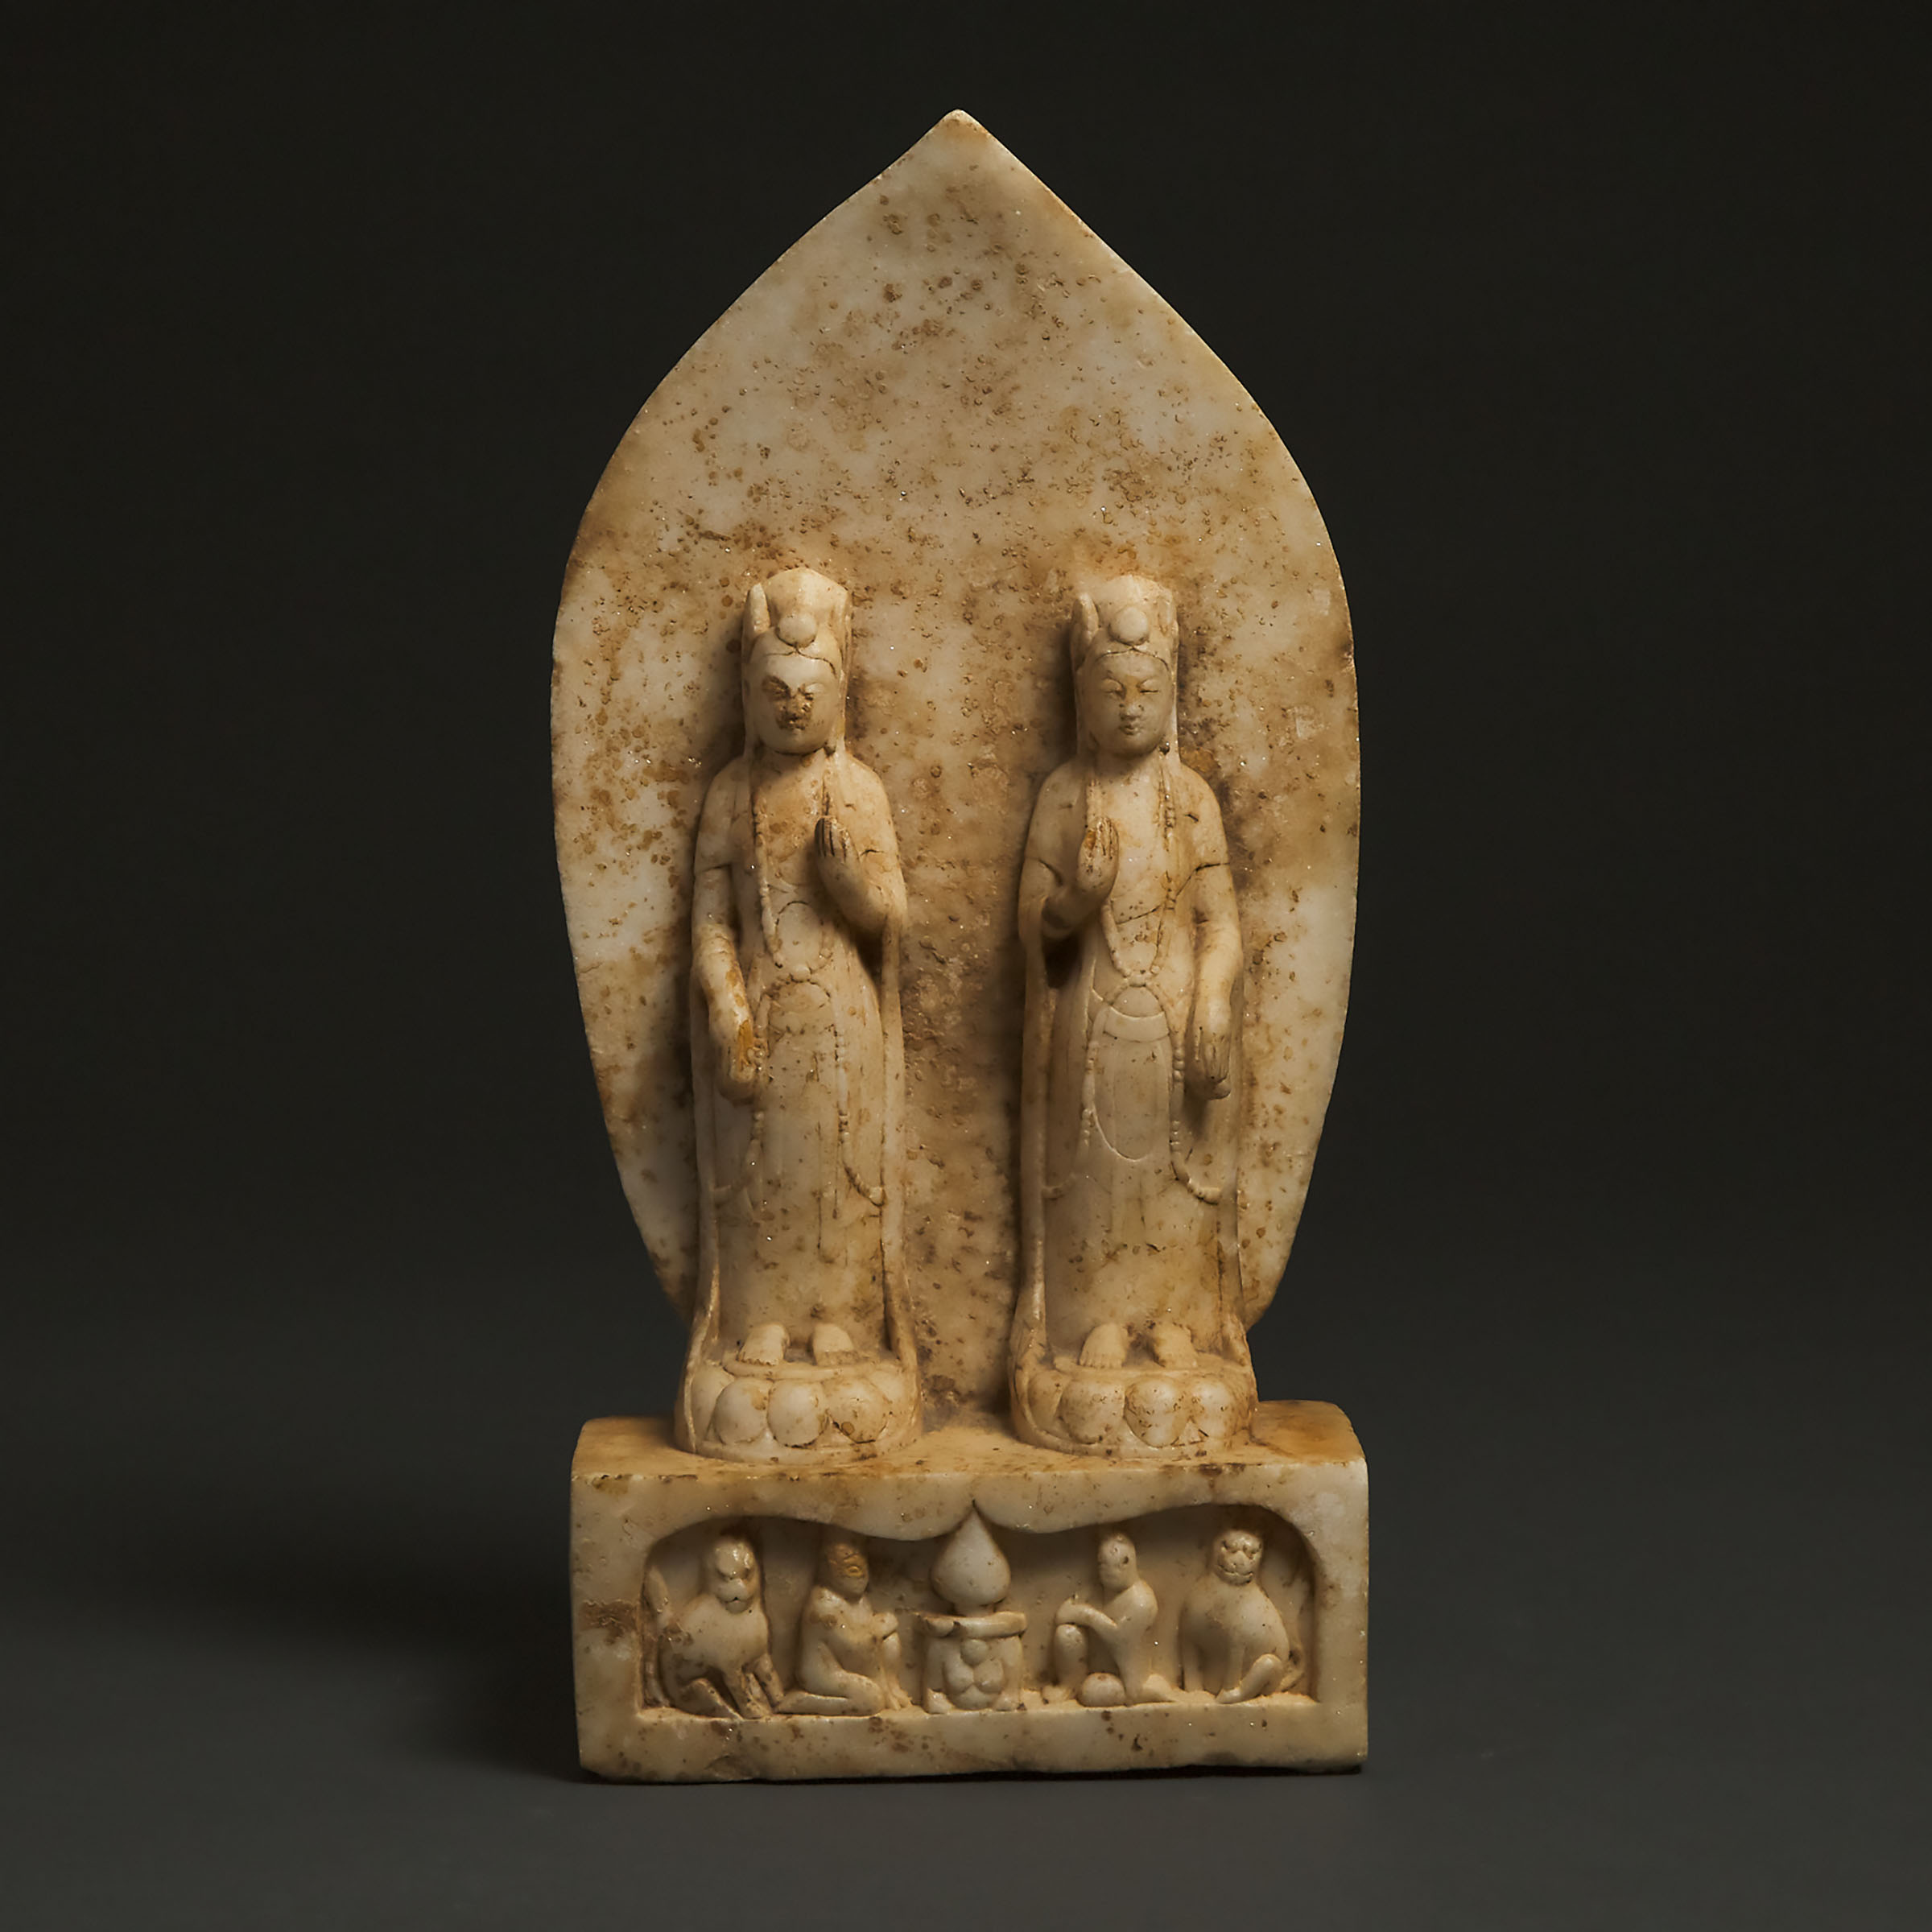 A White Marble Buddhist Stele of Two Bodhisattvas, Northern Qi Dynasty (AD 550-577)